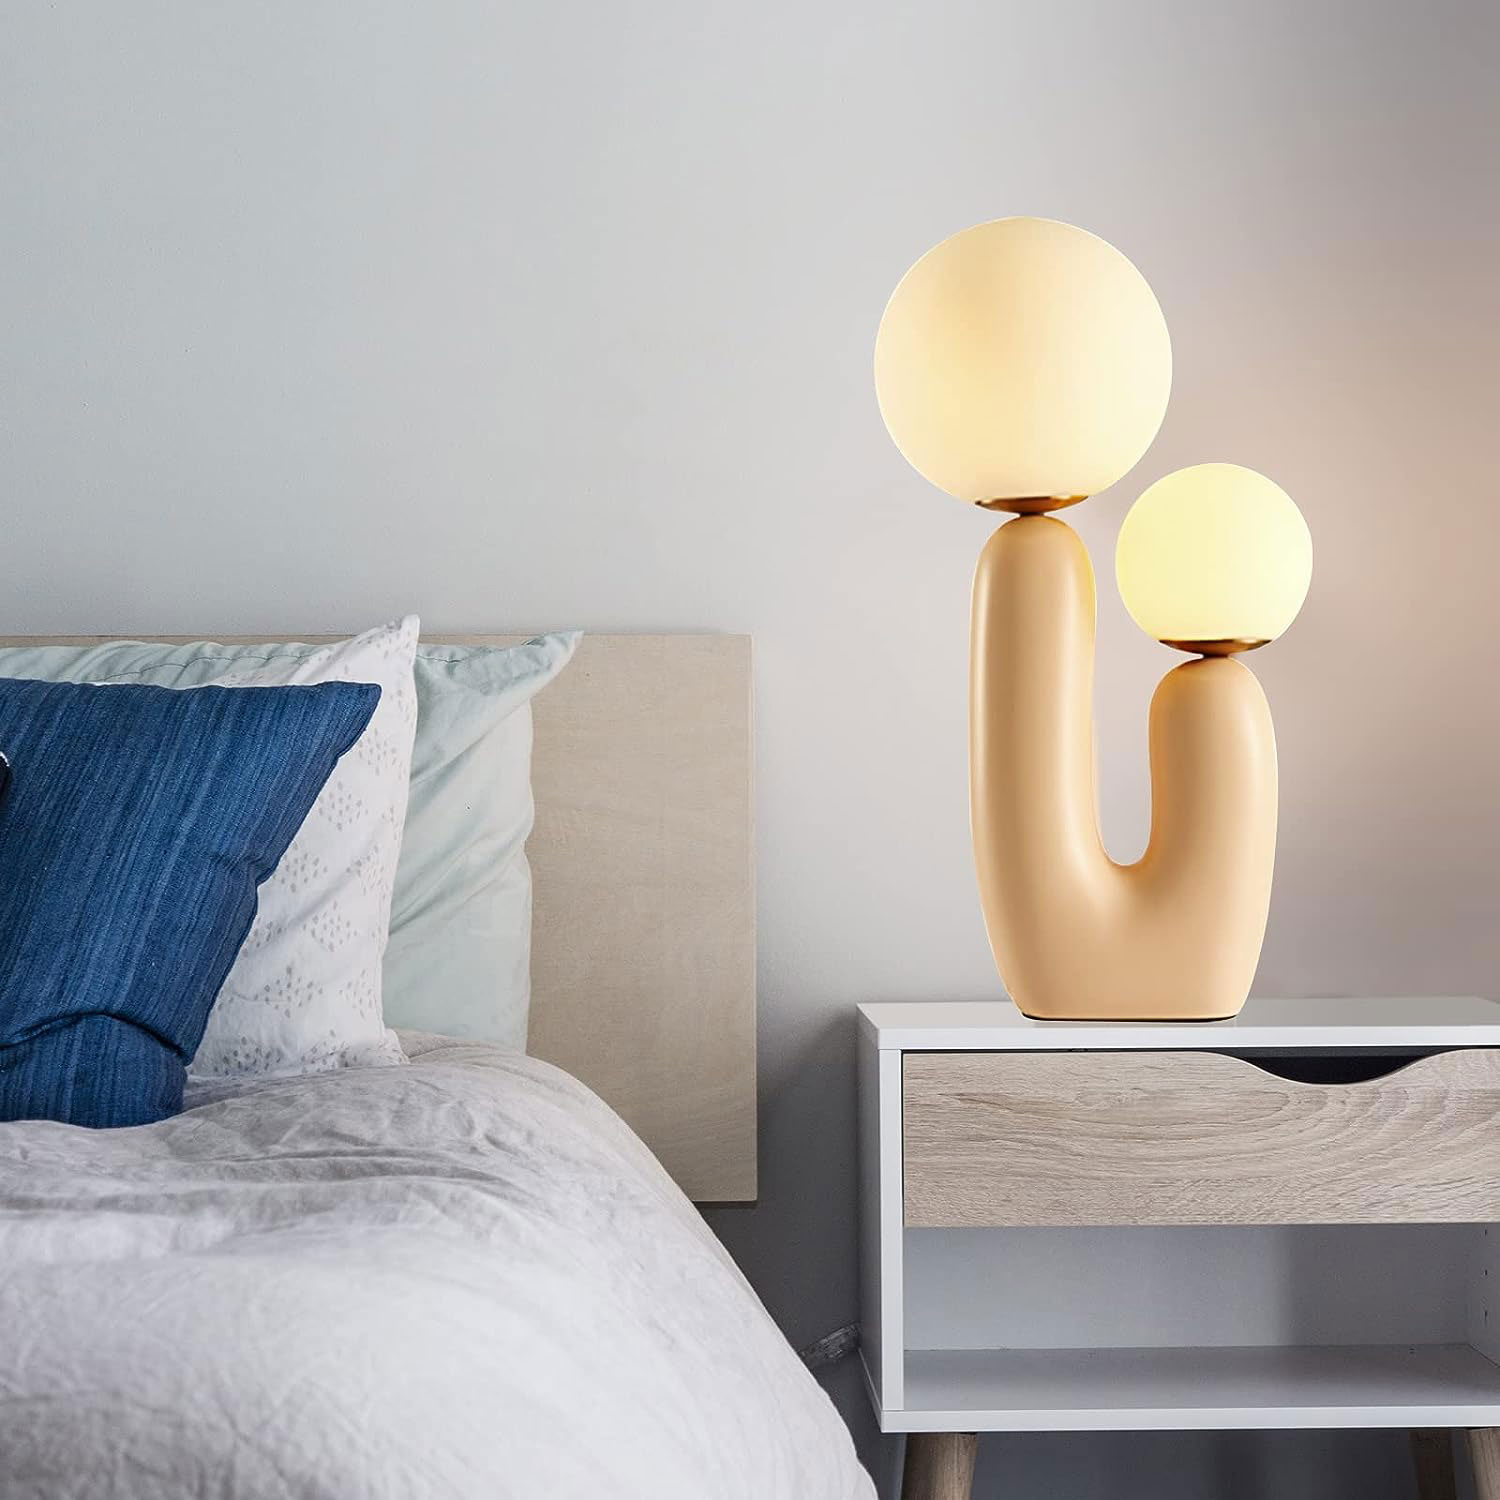 A unique rounded lamp near the bed